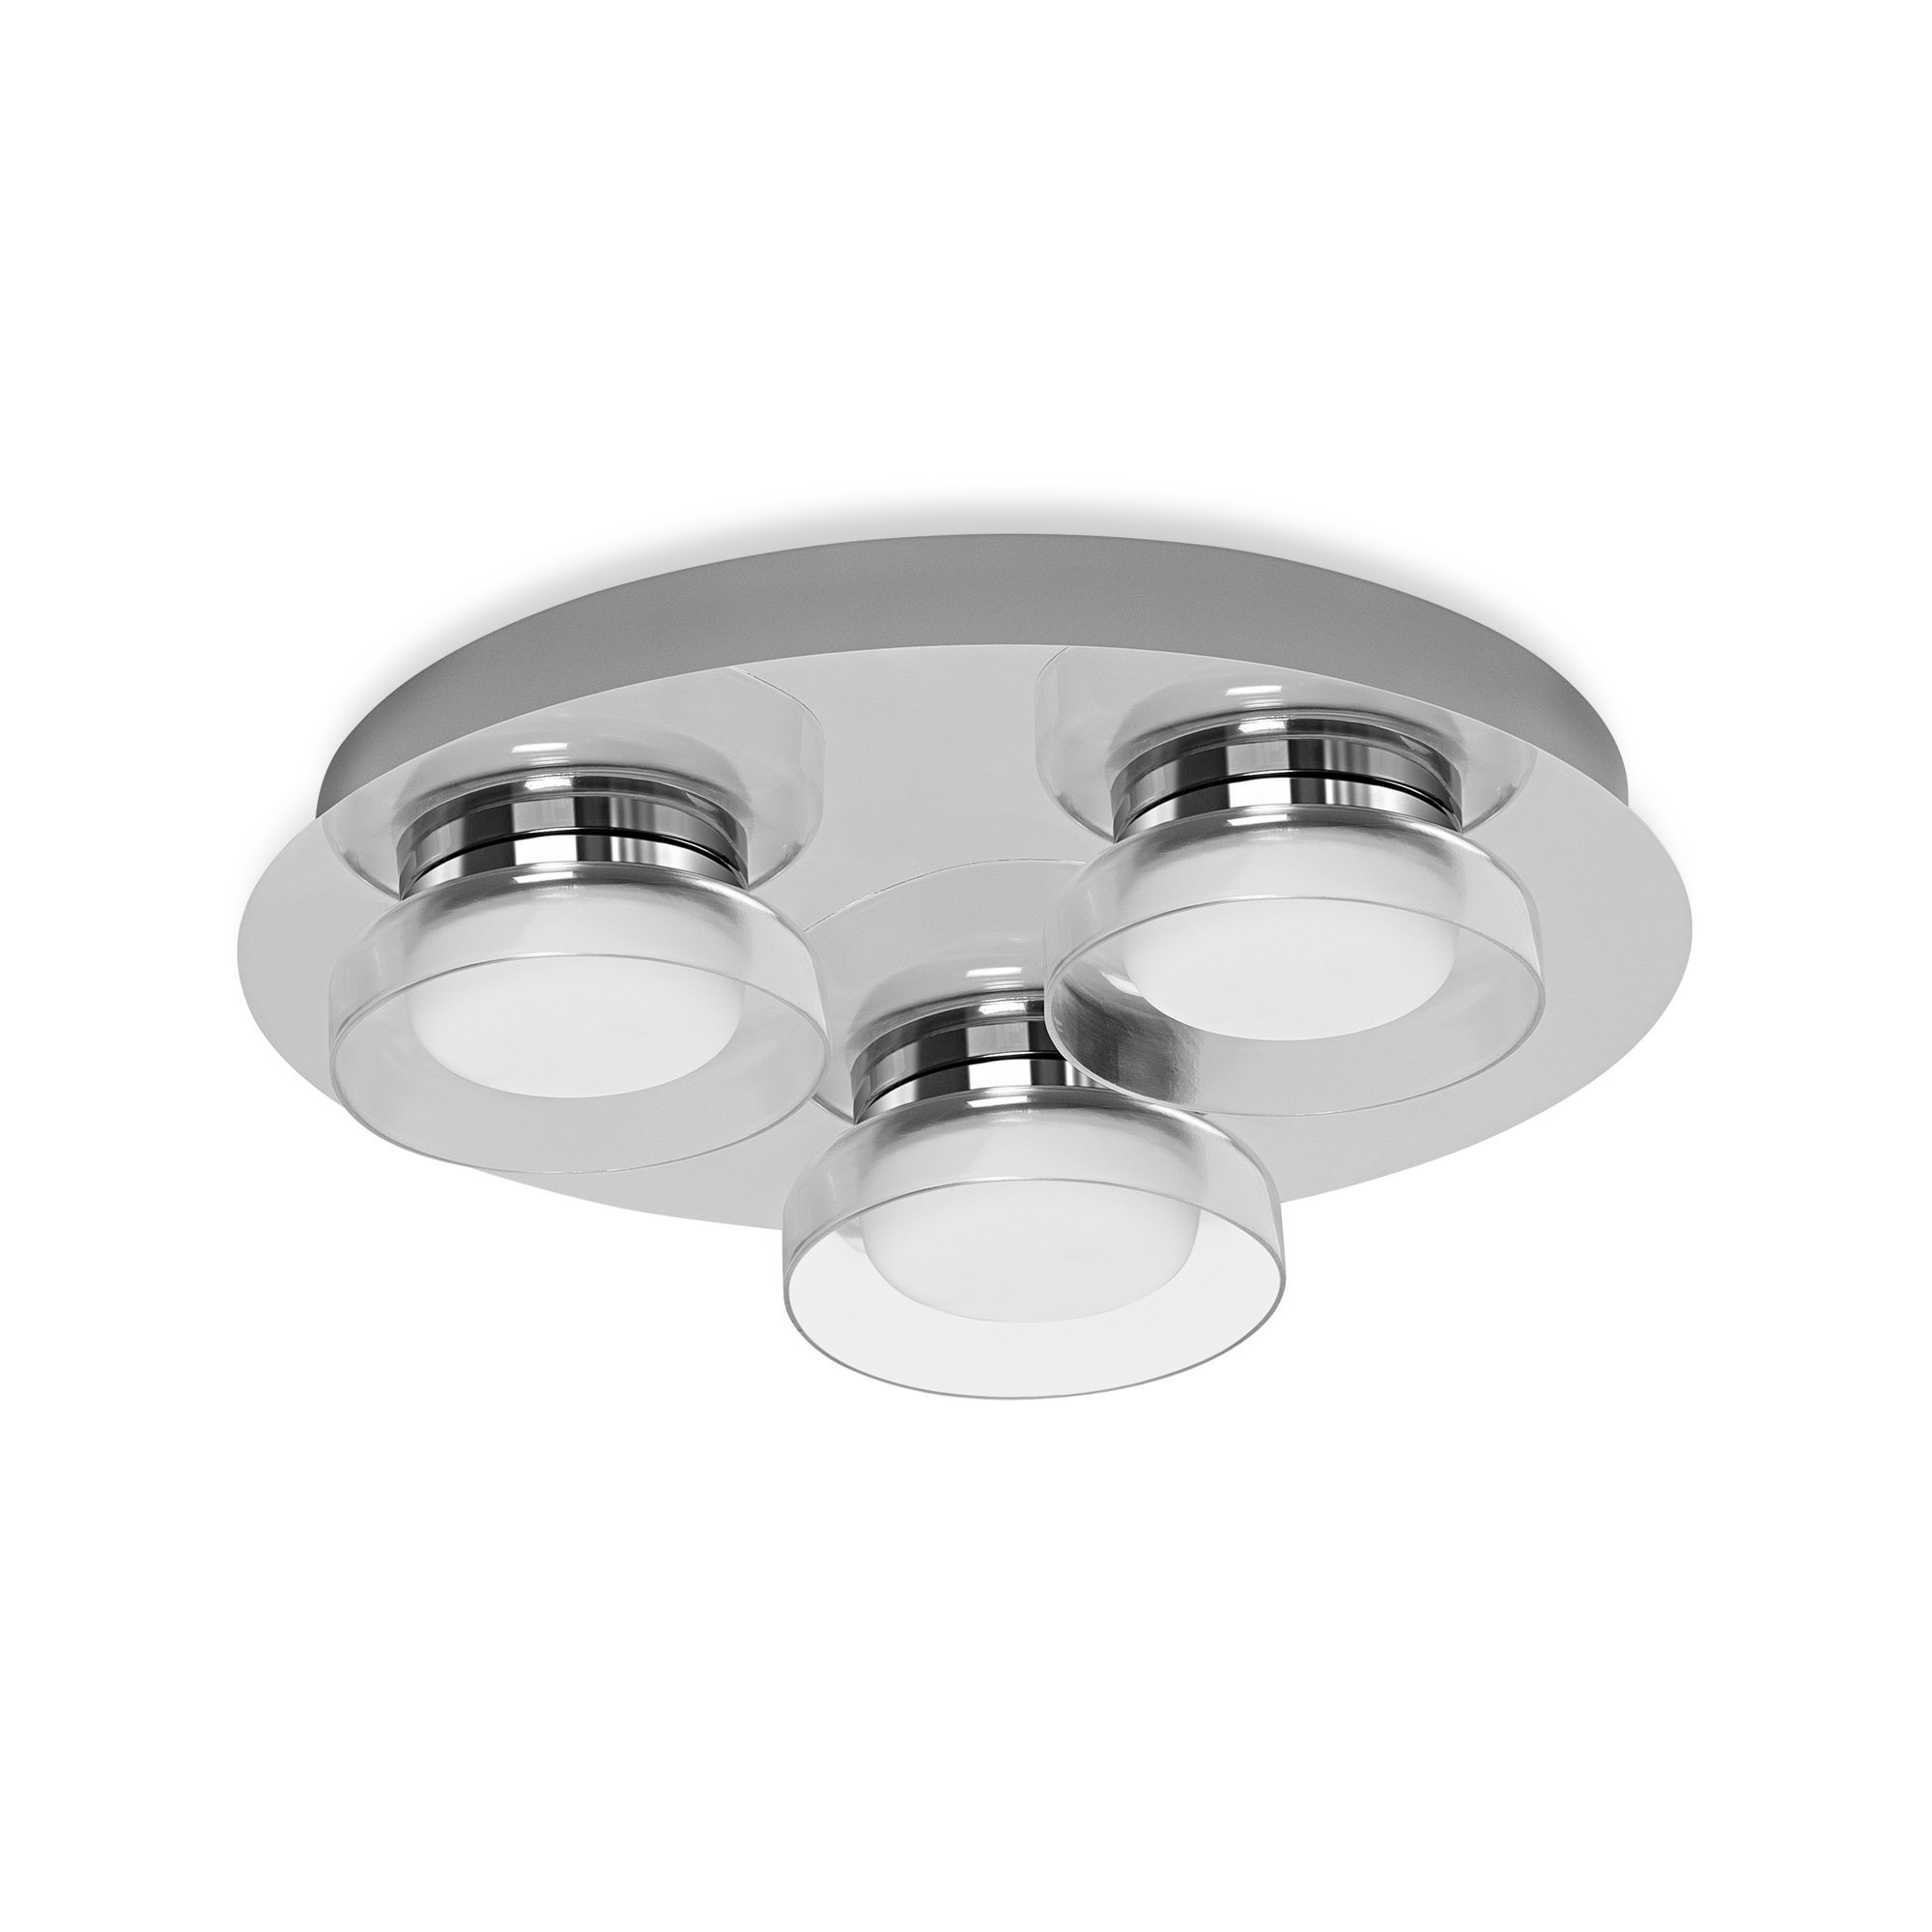 LEDVANCE SMART+ WiFi Tunable White LED Ceiling Light Round 300mm IP44 silver 1800lm